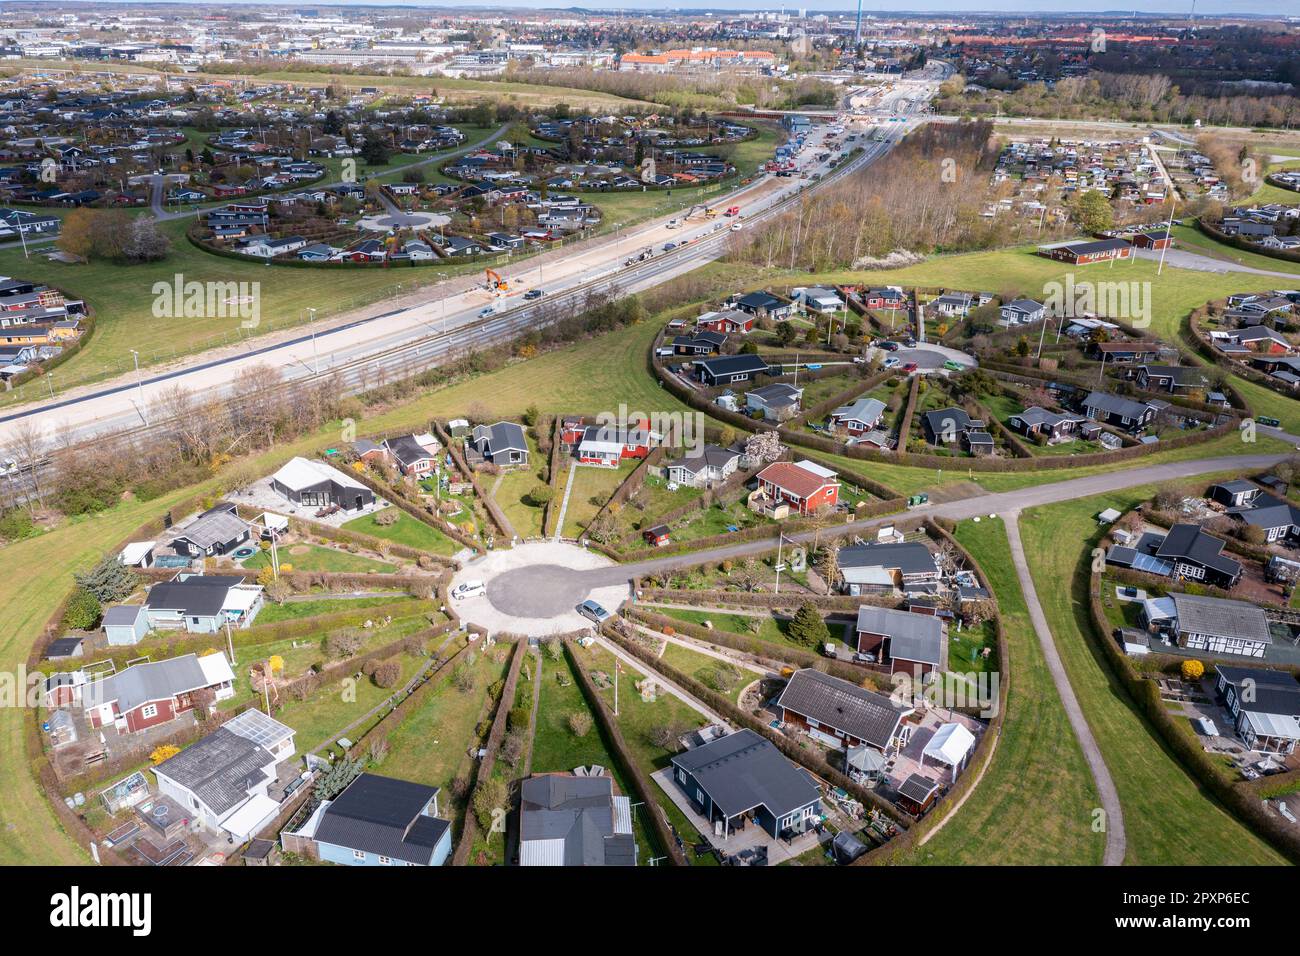 The circular allotment garden complex Brøndby Haveby. It was designed by the Danish landscape architect Erik Mygind. Stock Photo